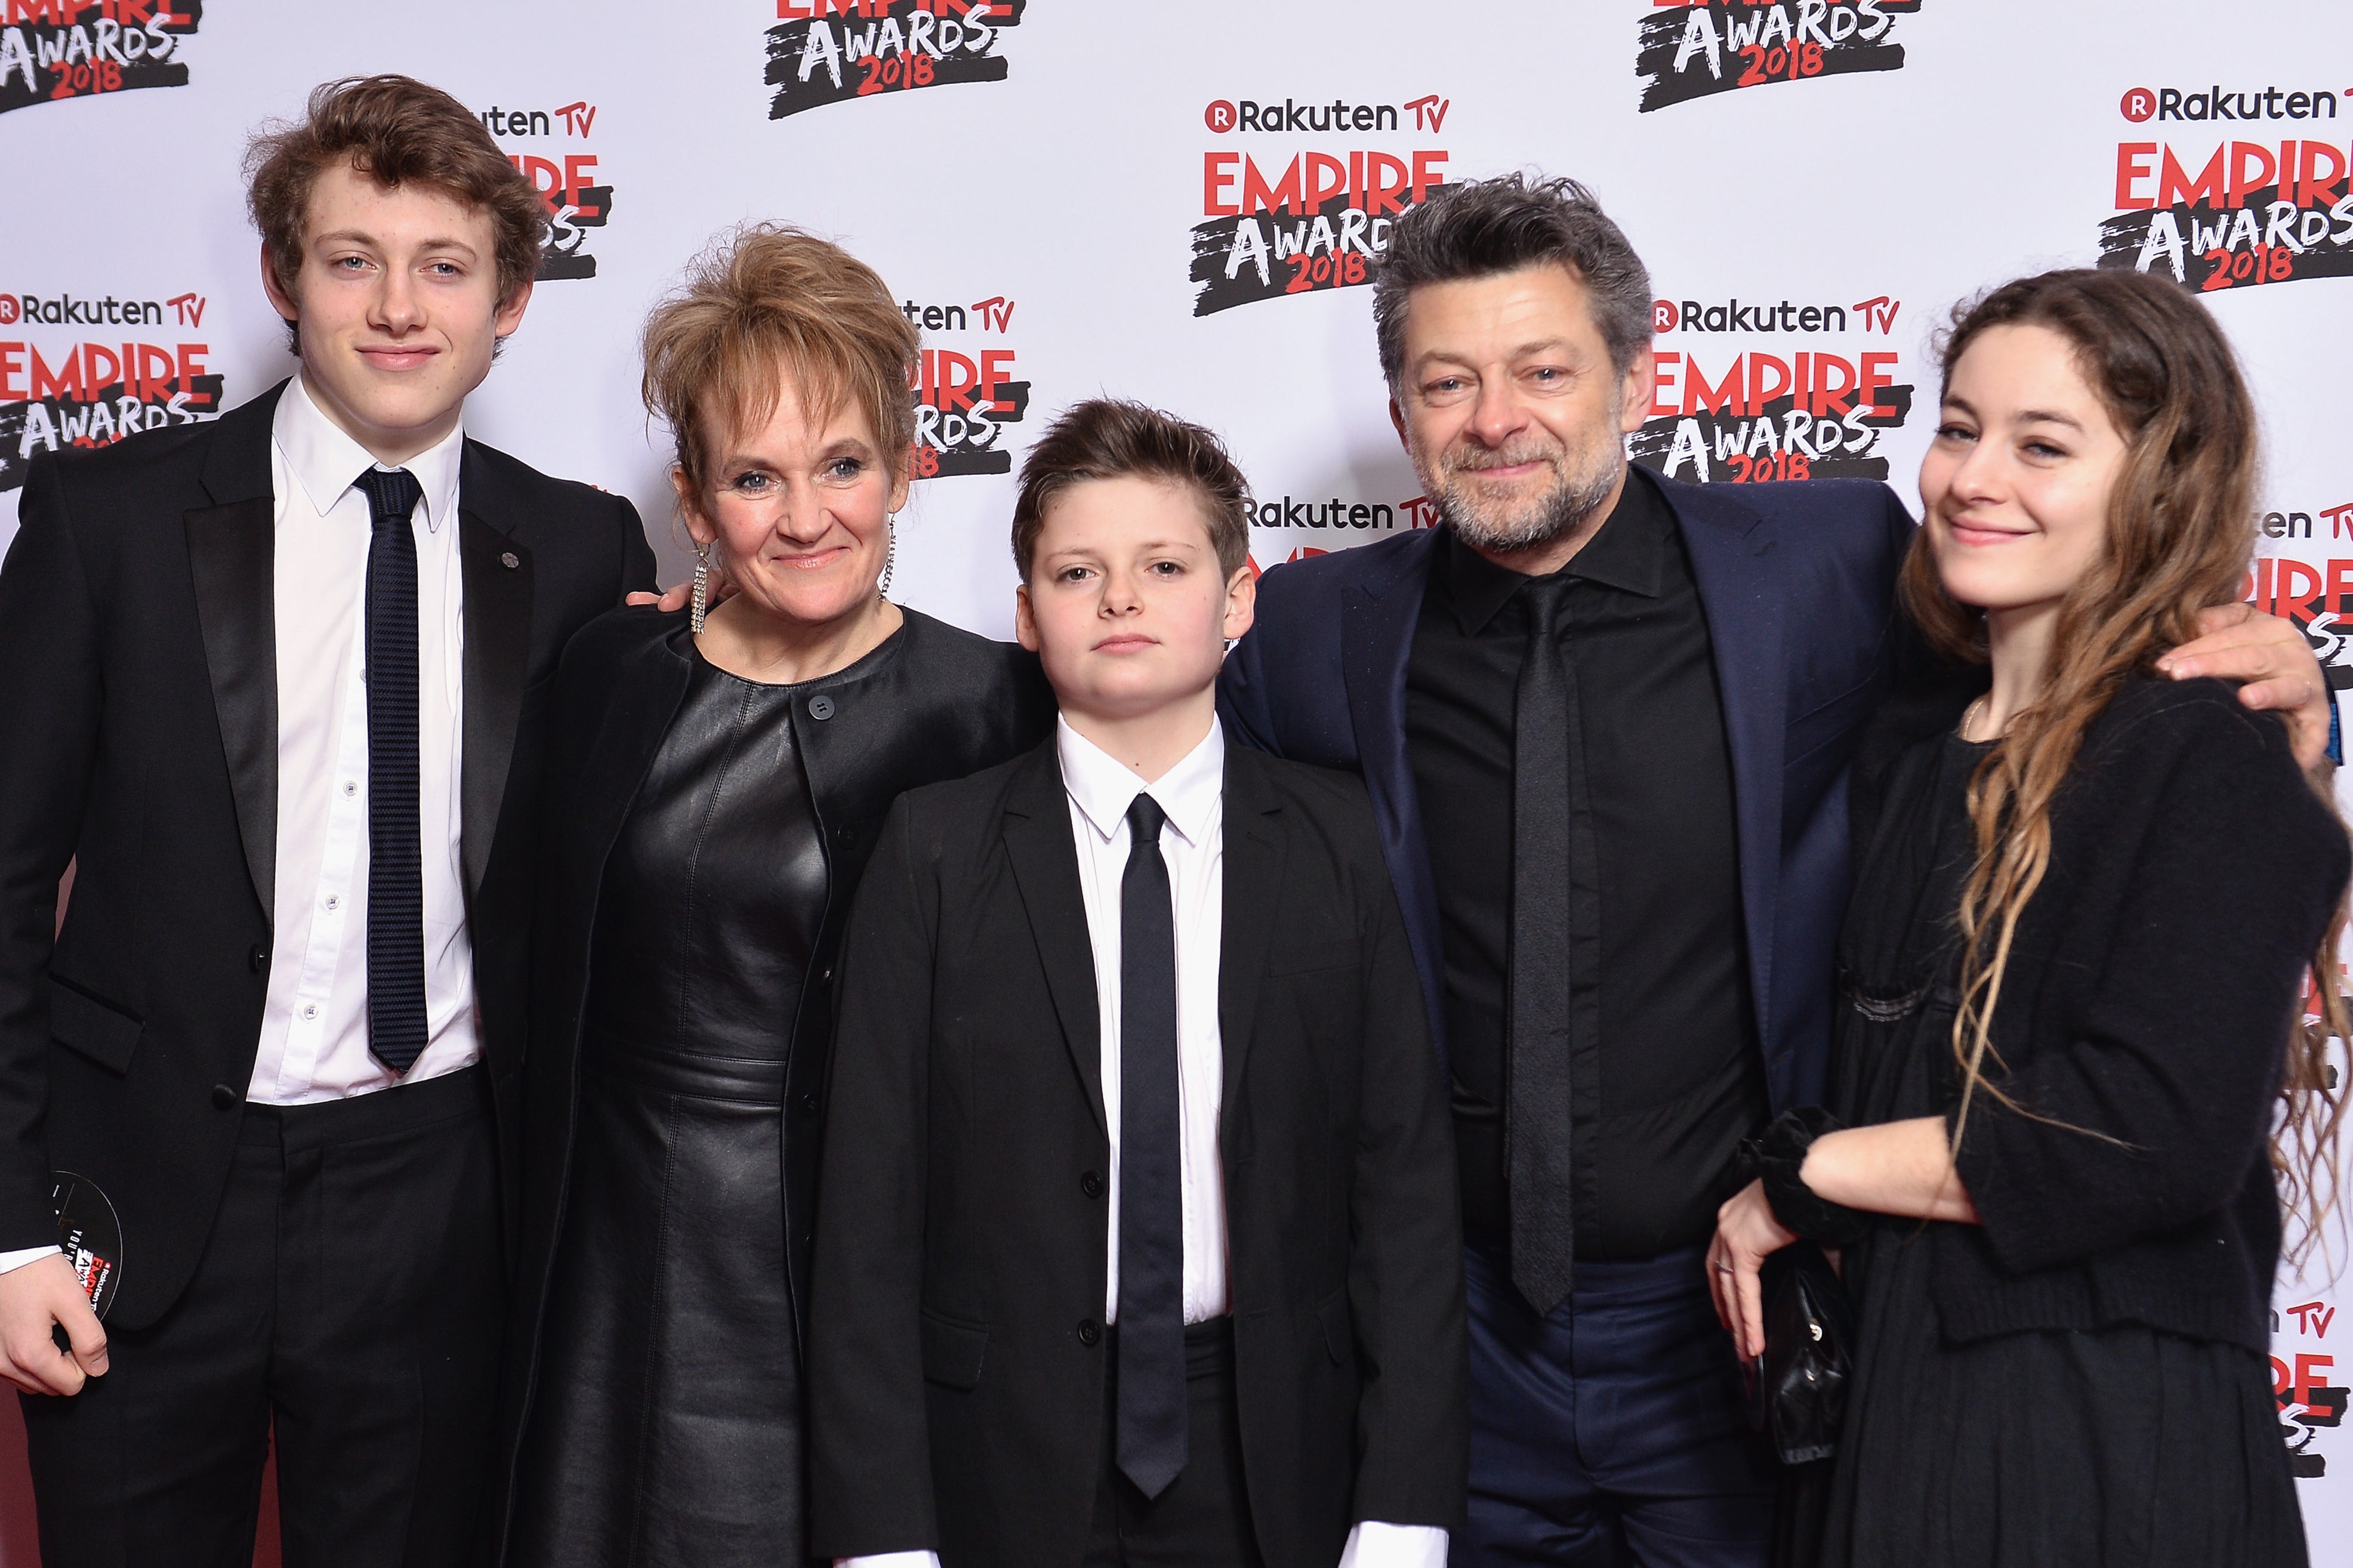 Serkis with his wife Lorraine Ashbourne and their children (left to right) Sonny, Louis and Ruby in 2018